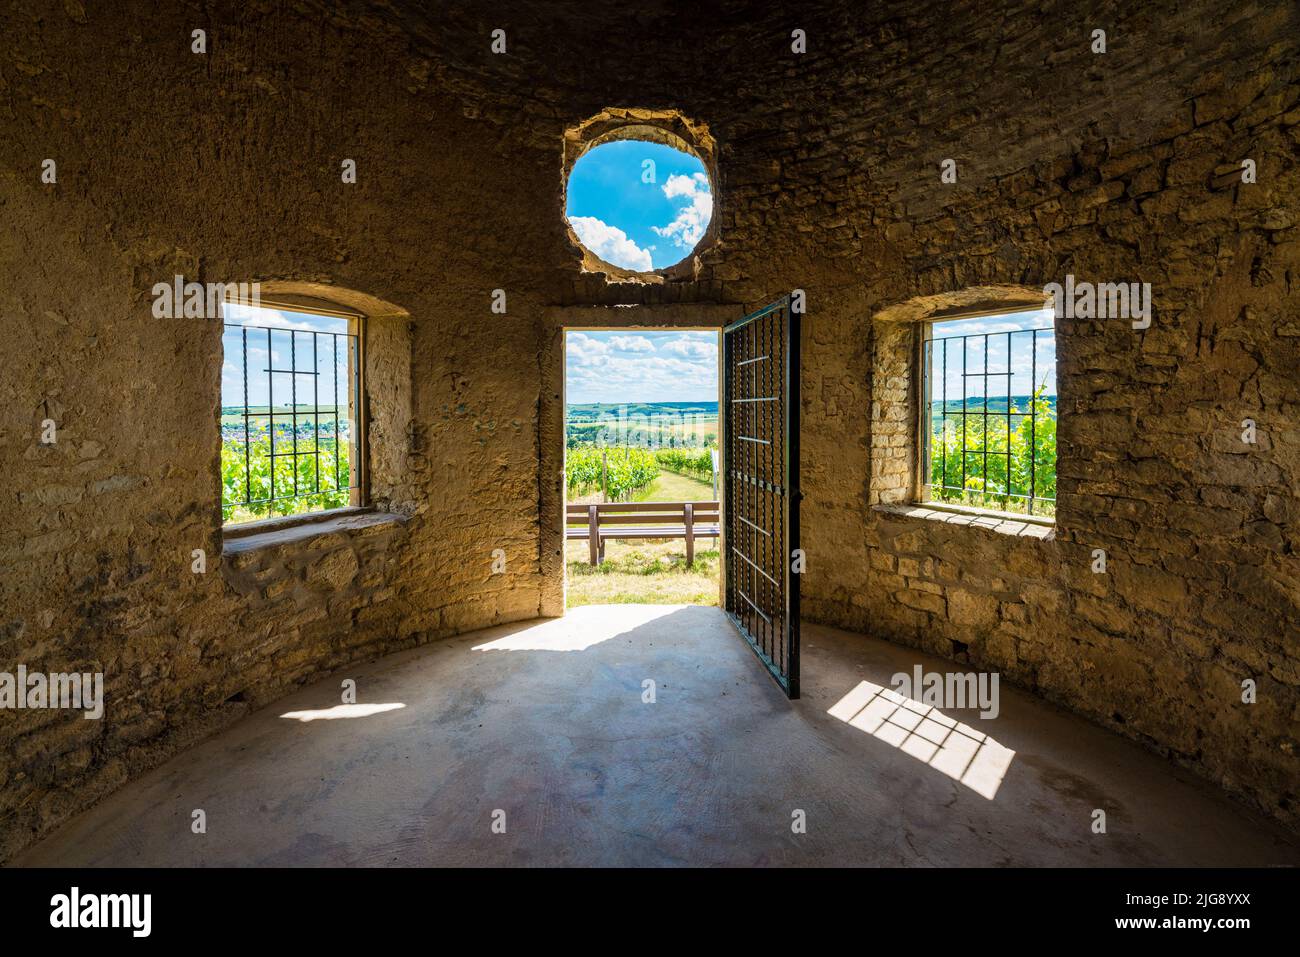 inside the Babo cottage in Rheinhessen, a cottage in the vineyard, so-called trullo, in reference to similar cottages in Apulia, serves as a shelter for the winegrowers in bad weather, Stock Photo